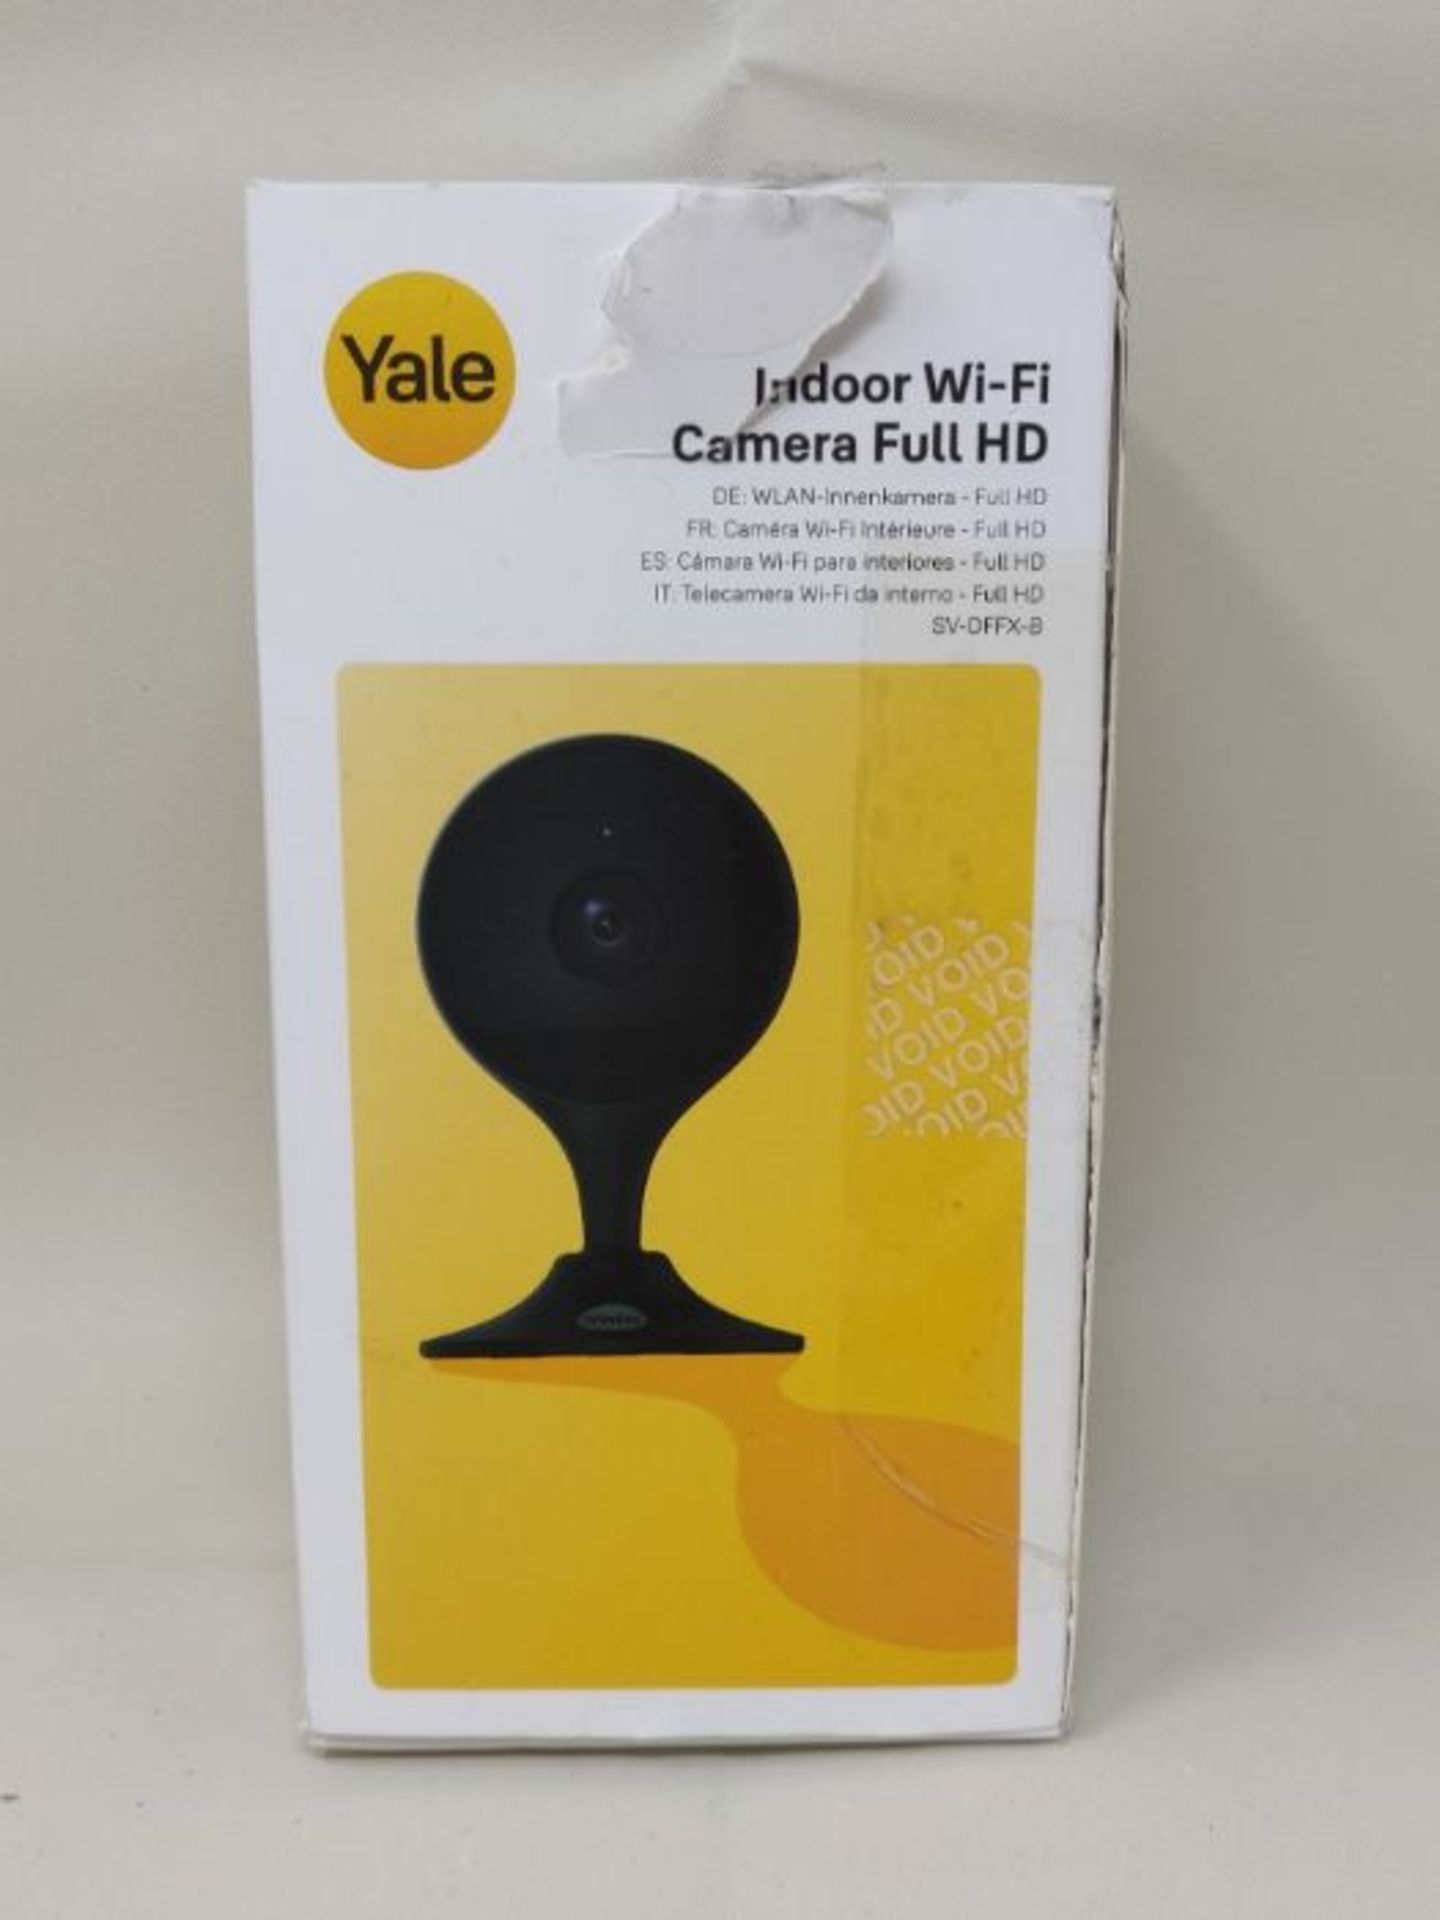 Yale Smart Living SV-DFFX-B - Indoor Wi-Fi Camera -HD - Motion Detection - Two Way Tal - Image 2 of 3